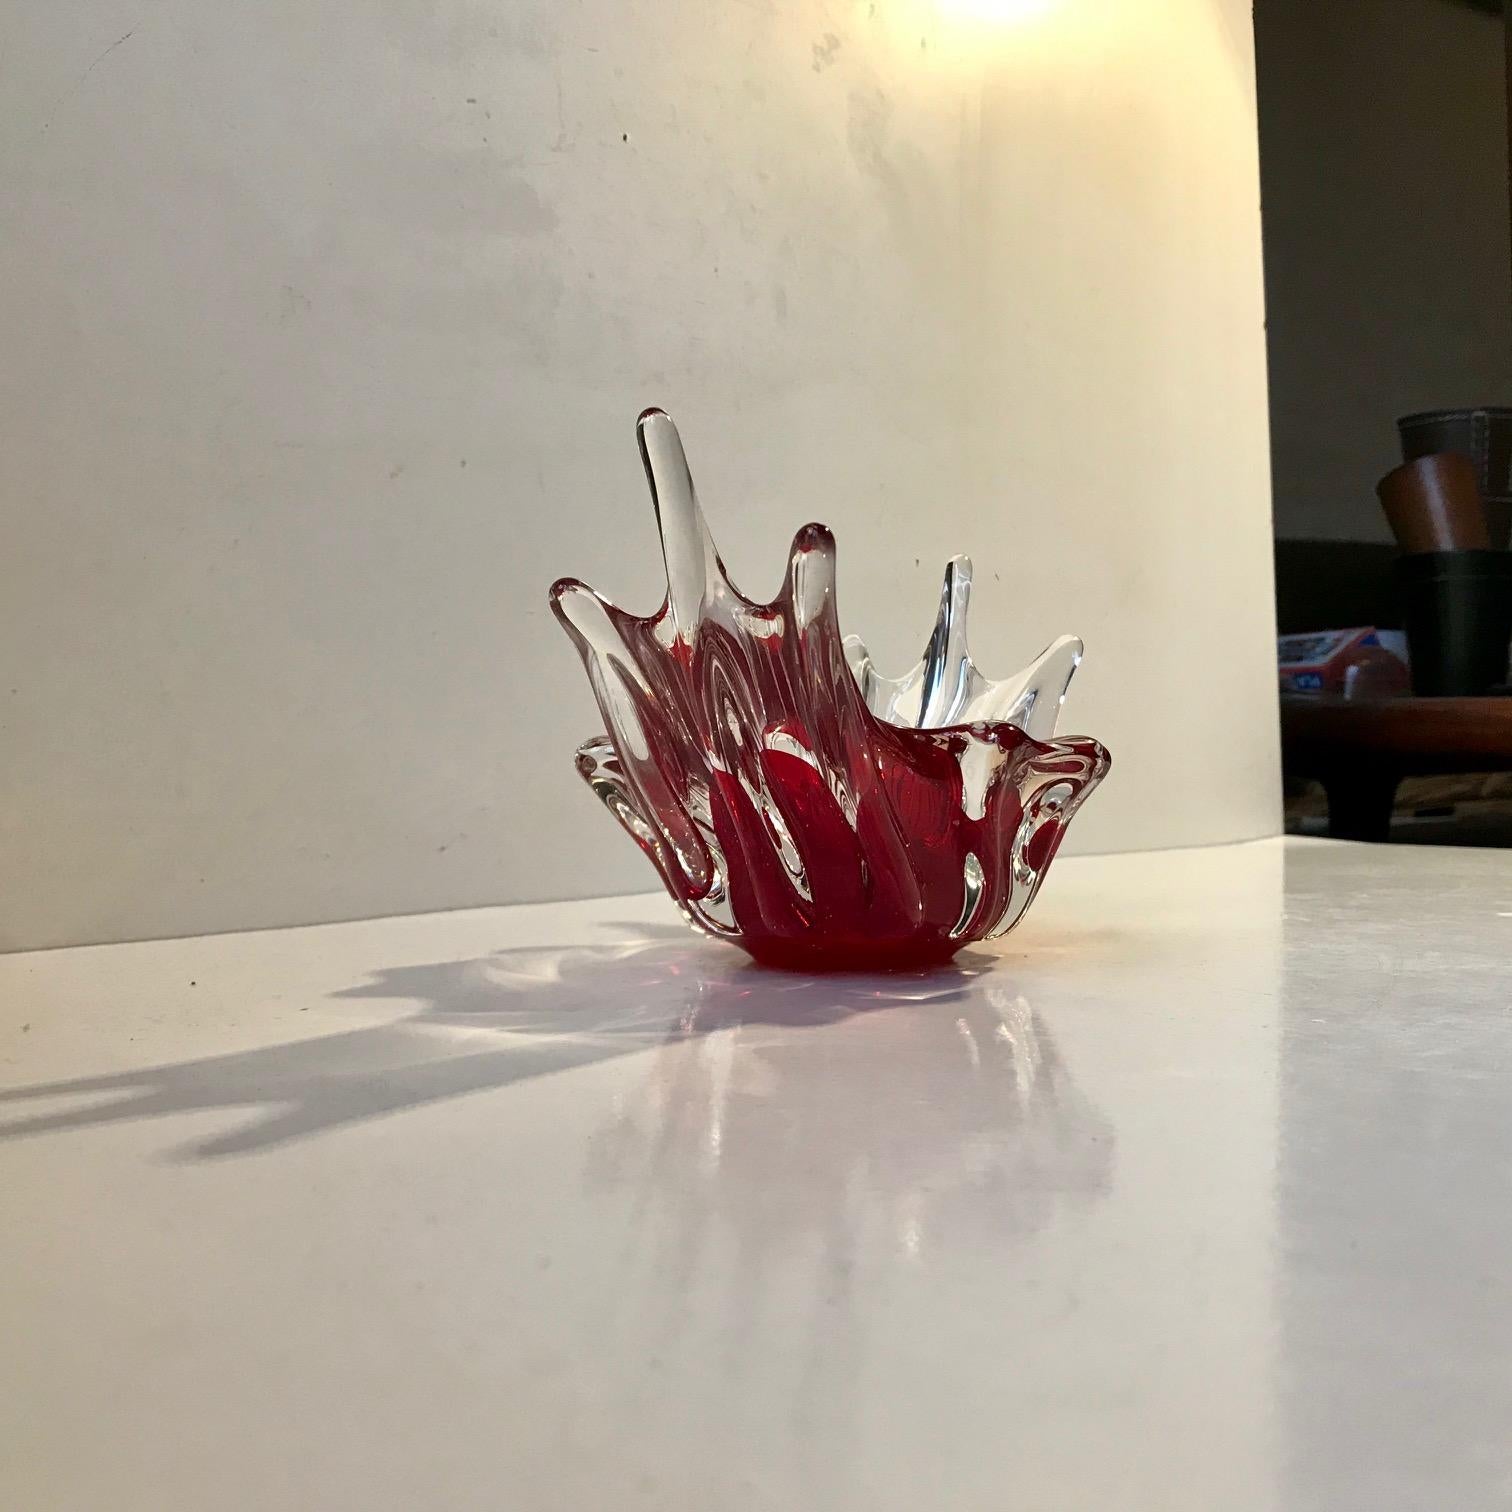 Organically shaped art glass bowl or dish in ruby red and clear handblown glass. Designed and studio made by Fratelli Toso in Murano Italy during the 1960s. Measurements: W: 22, H: 12 cm.